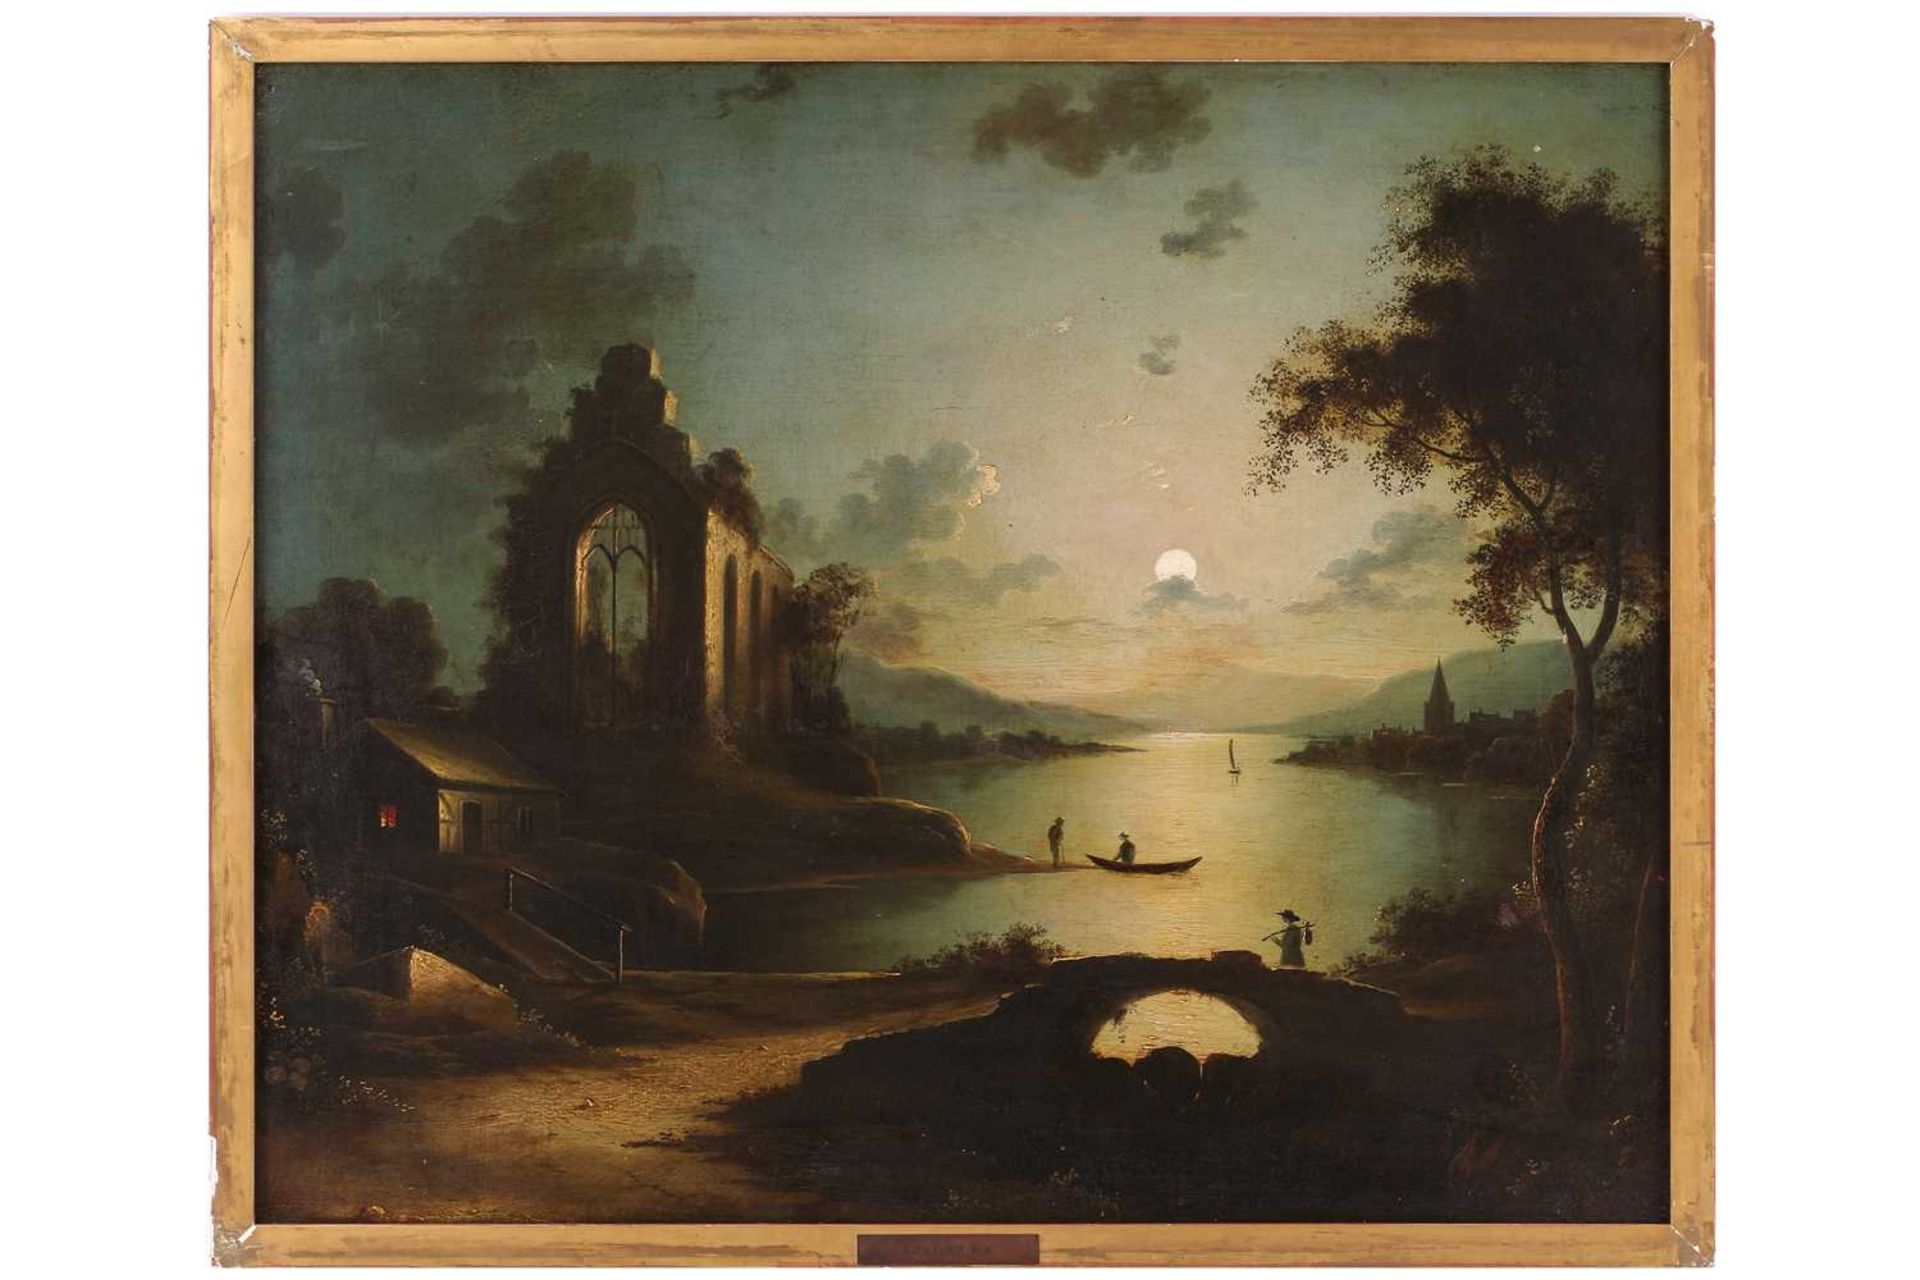 Manner of Sebastian Pether (1790 - 1844), Moonlit Riverscene with Ruins, oil on canvas, 49 x 59.5